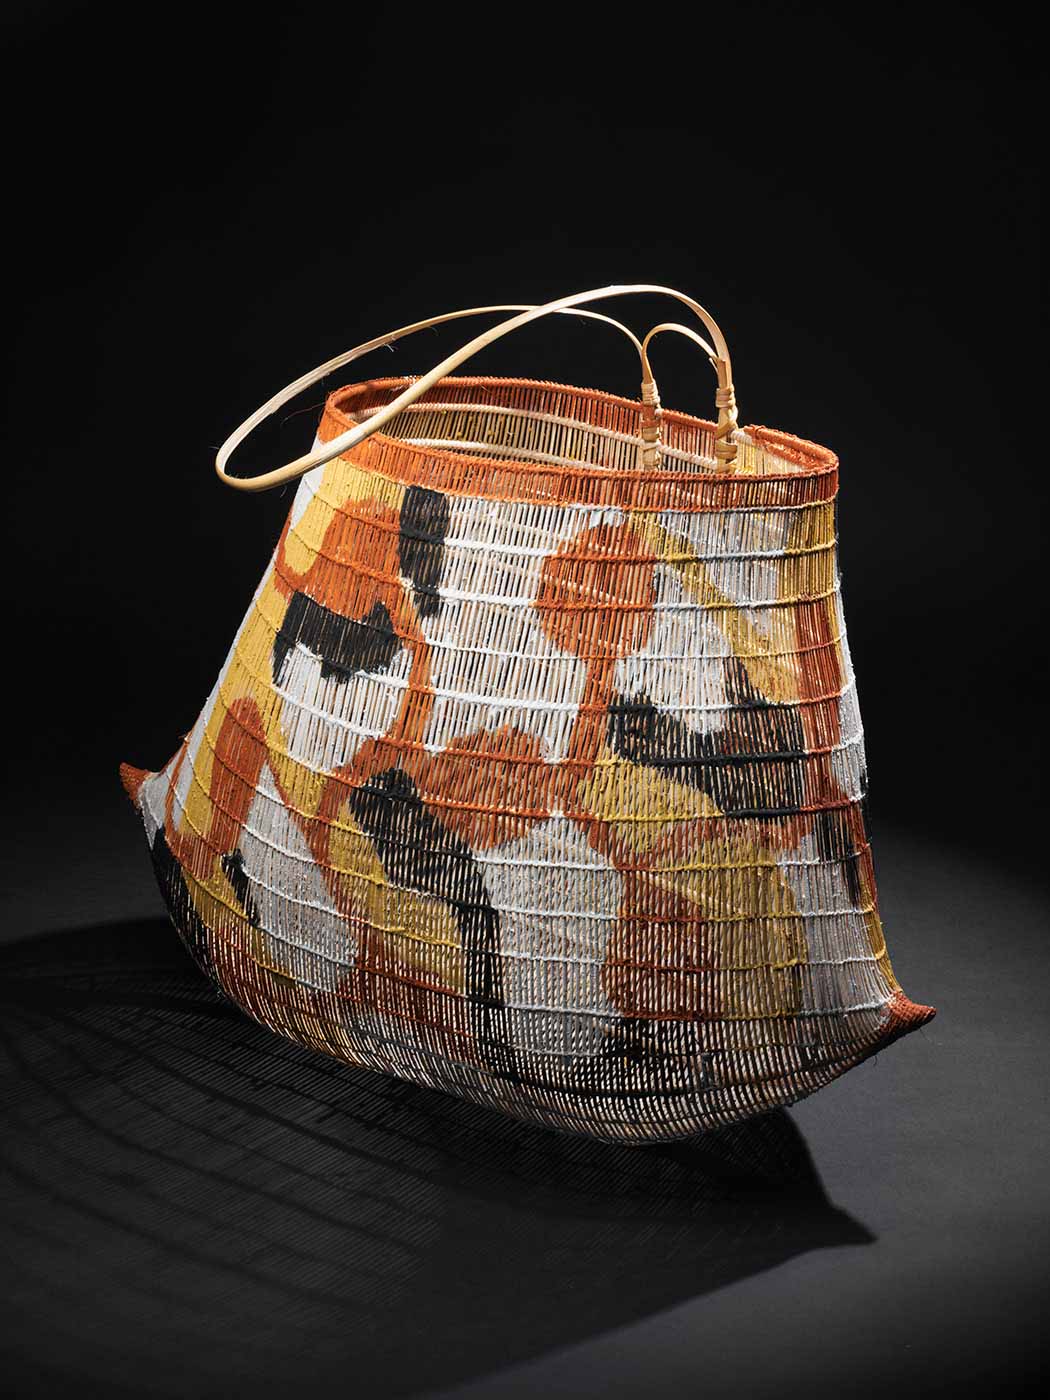 Woven baskets. - click to view larger image